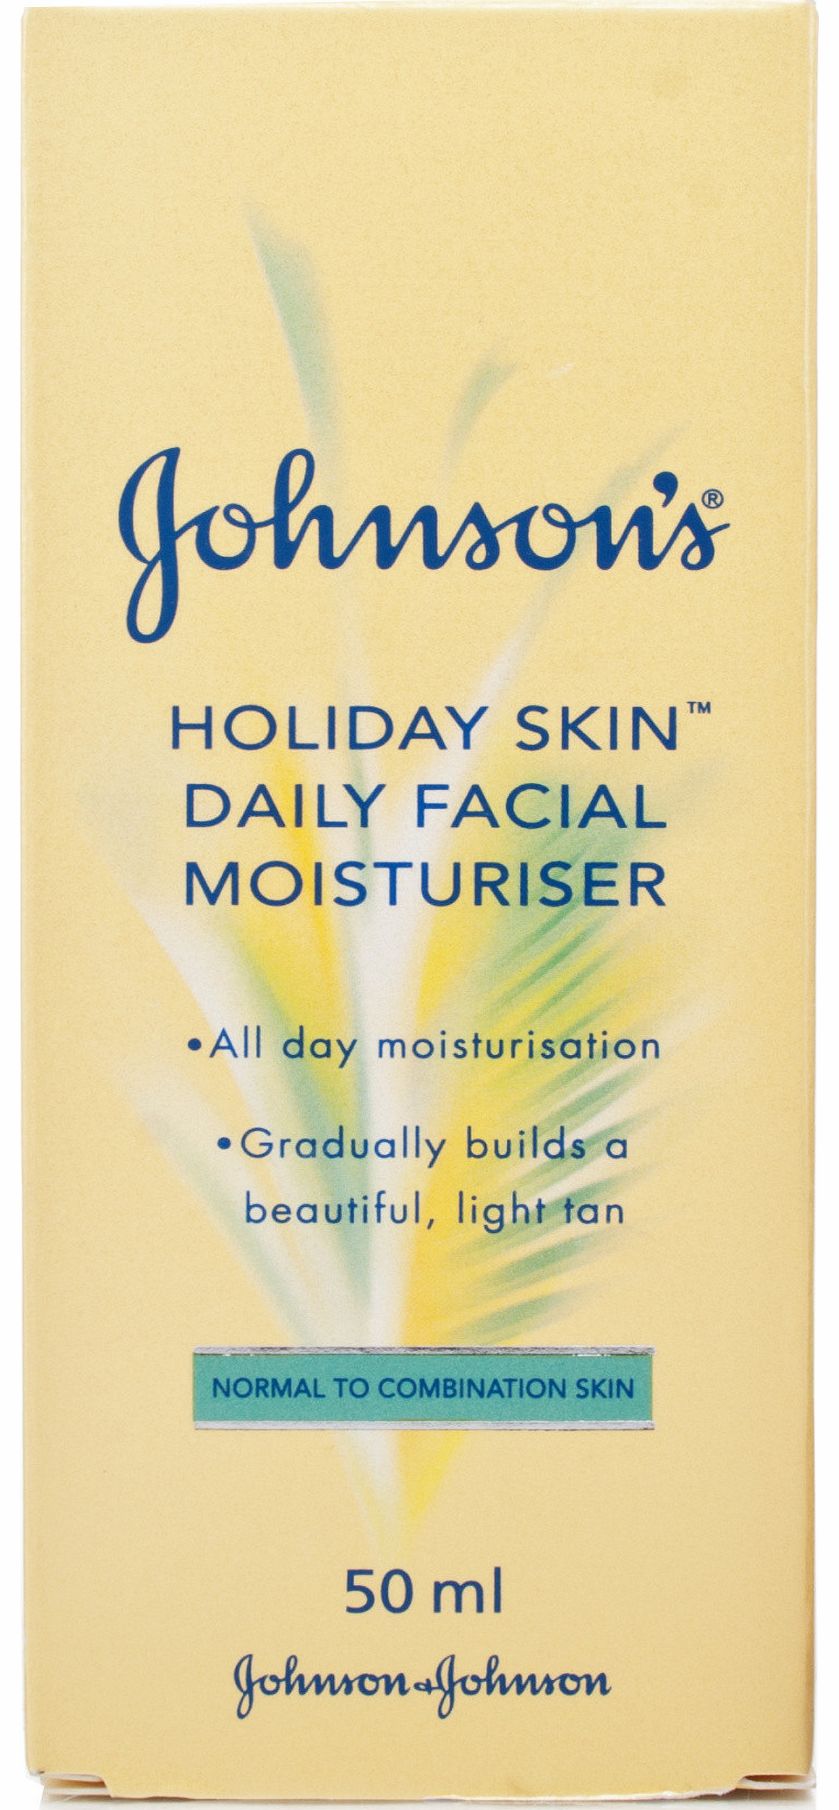 Johnsons Skin Facial Moisturiser for normal/combination skin is a non-greasy formula that quickly melts into the skin to gently moisturise, while gradually building up a natural hint of colour every single day. It is available in 2 gentle shade varia